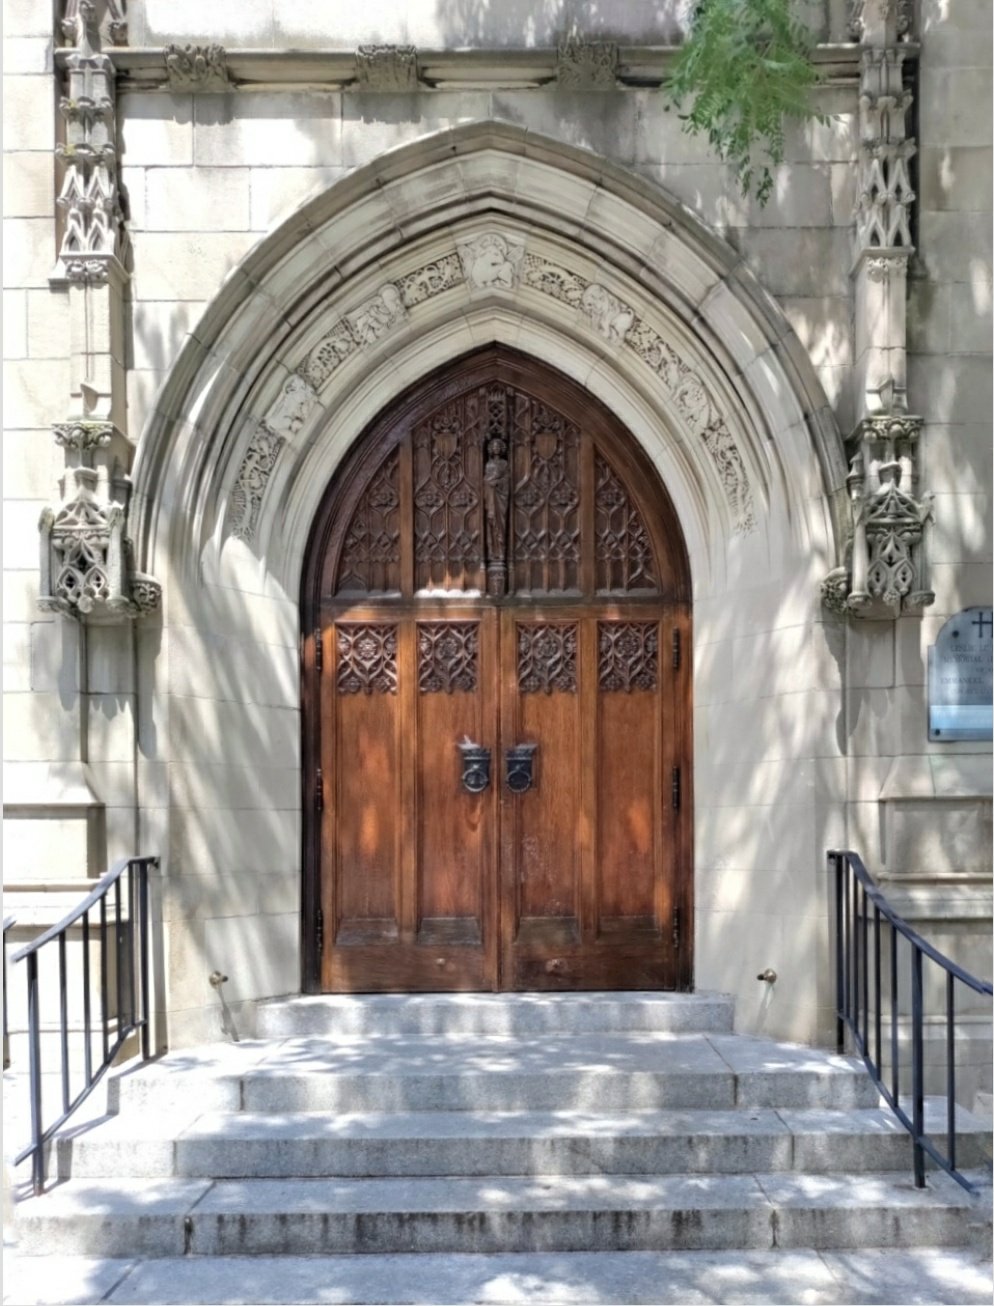 Architectural detail of a church front door and carved facade.